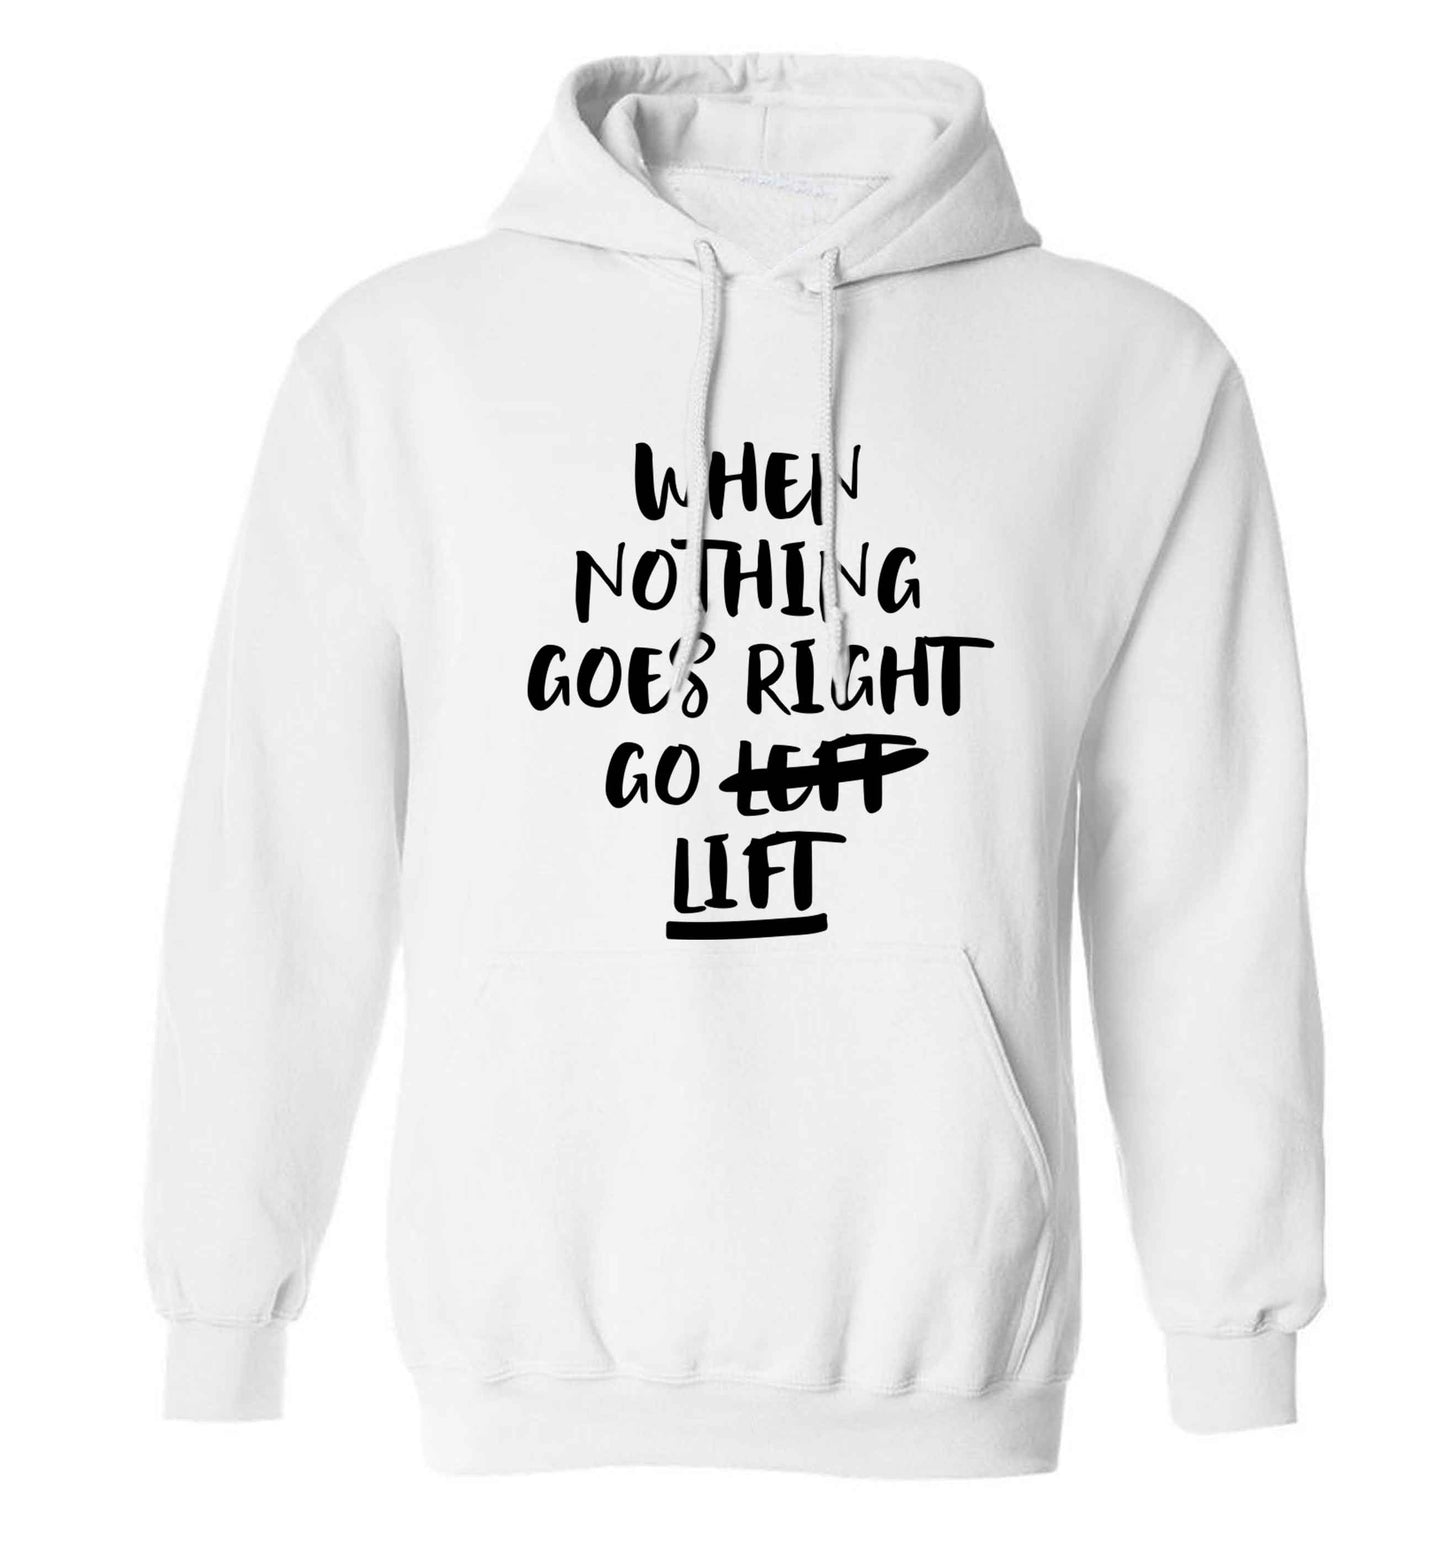 When nothing goes right go lift adults unisex white hoodie 2XL